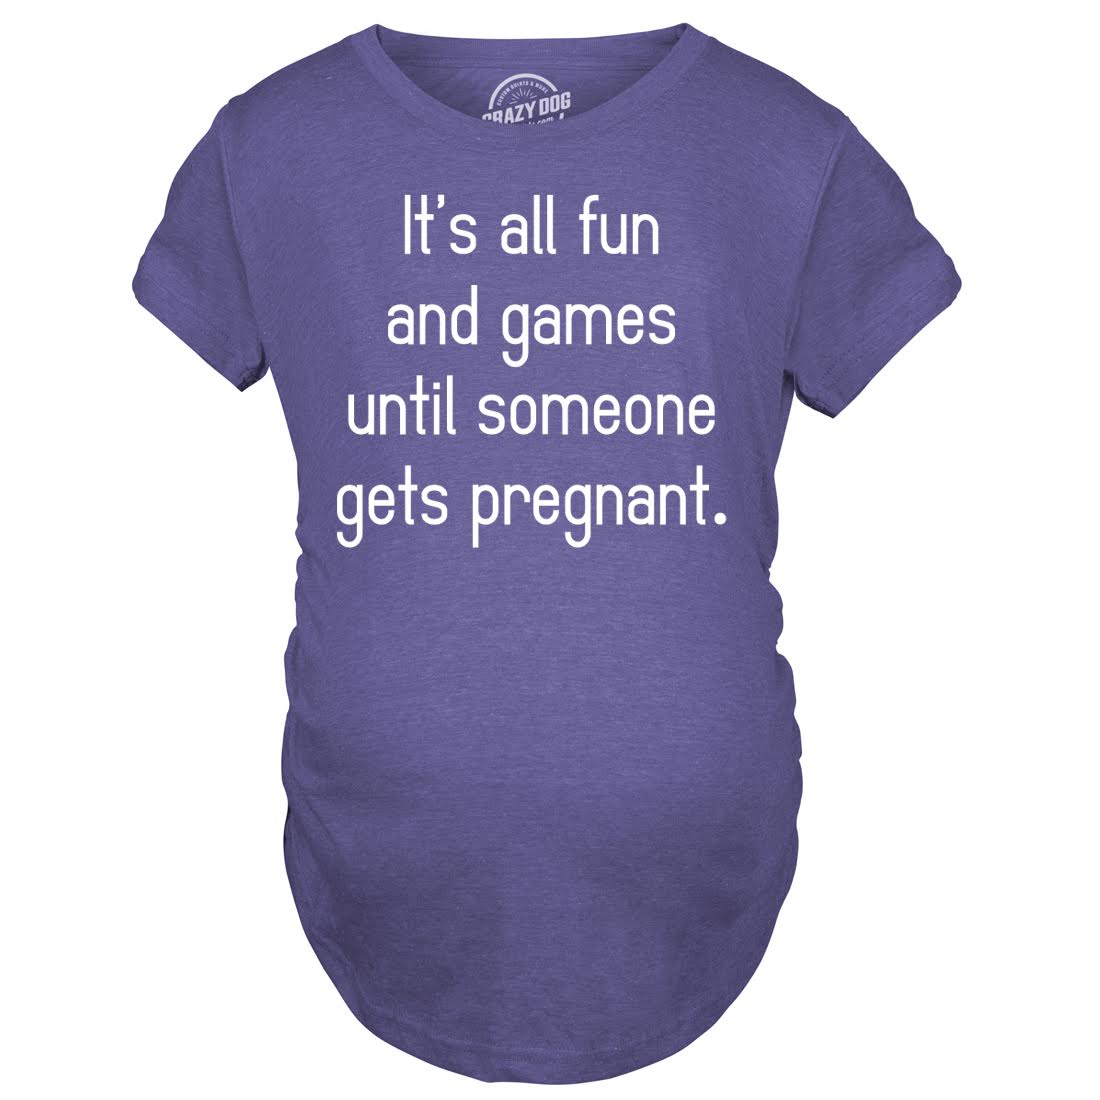 Funny Heather Purple Fun And Games Maternity T Shirt Nerdy Tee